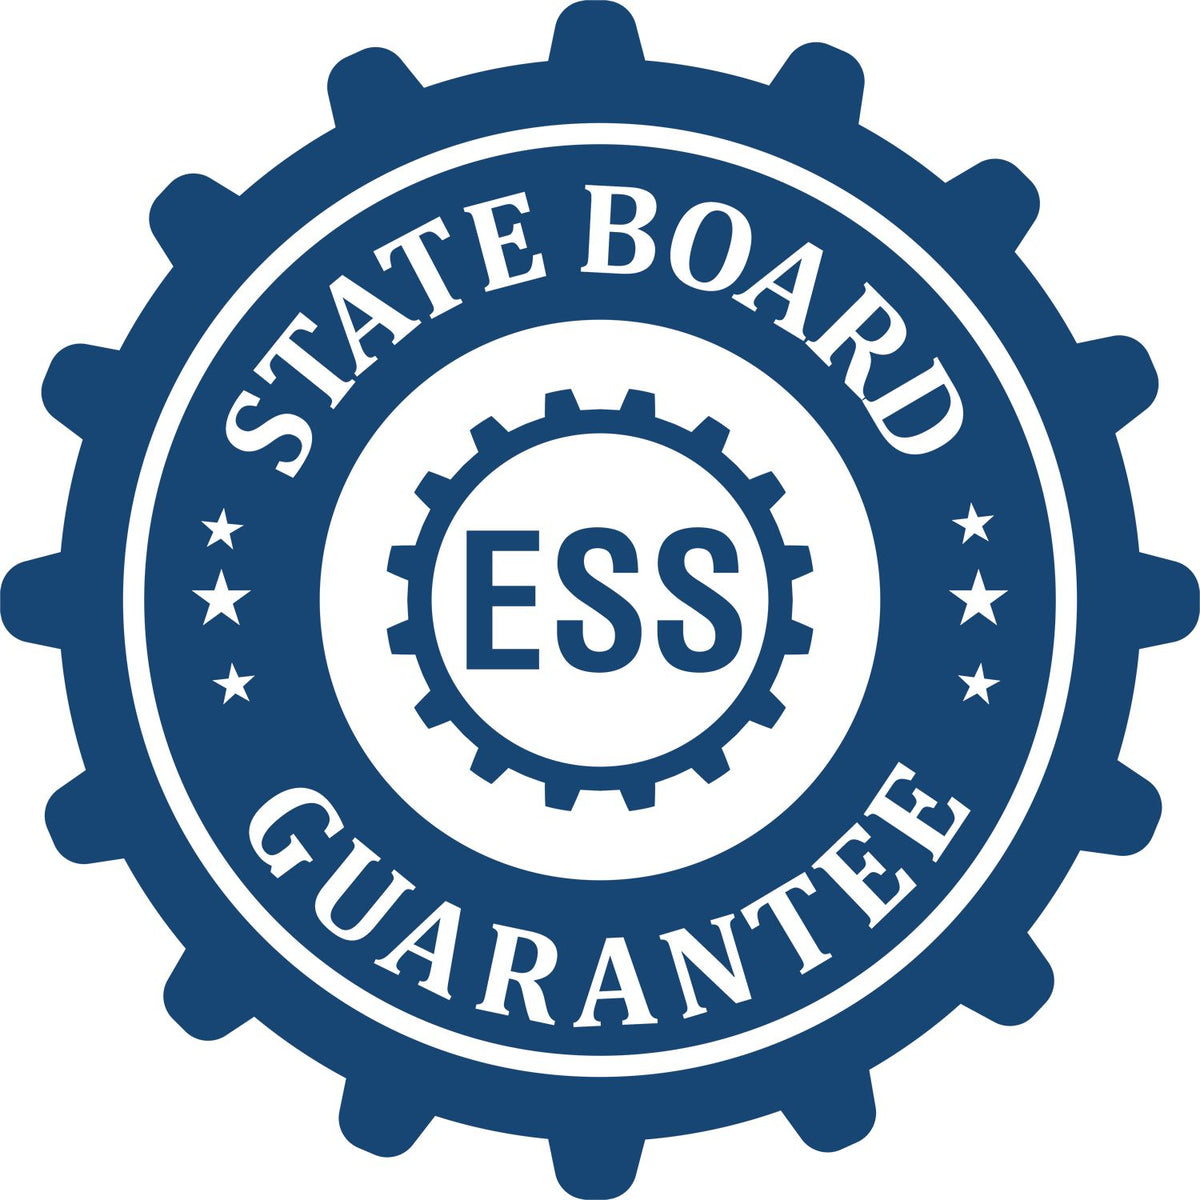 An emblem in a gear shape illustrating a state board guarantee for the Premium MaxLight Pre-Inked North Dakota Landscape Architectural Stamp product.